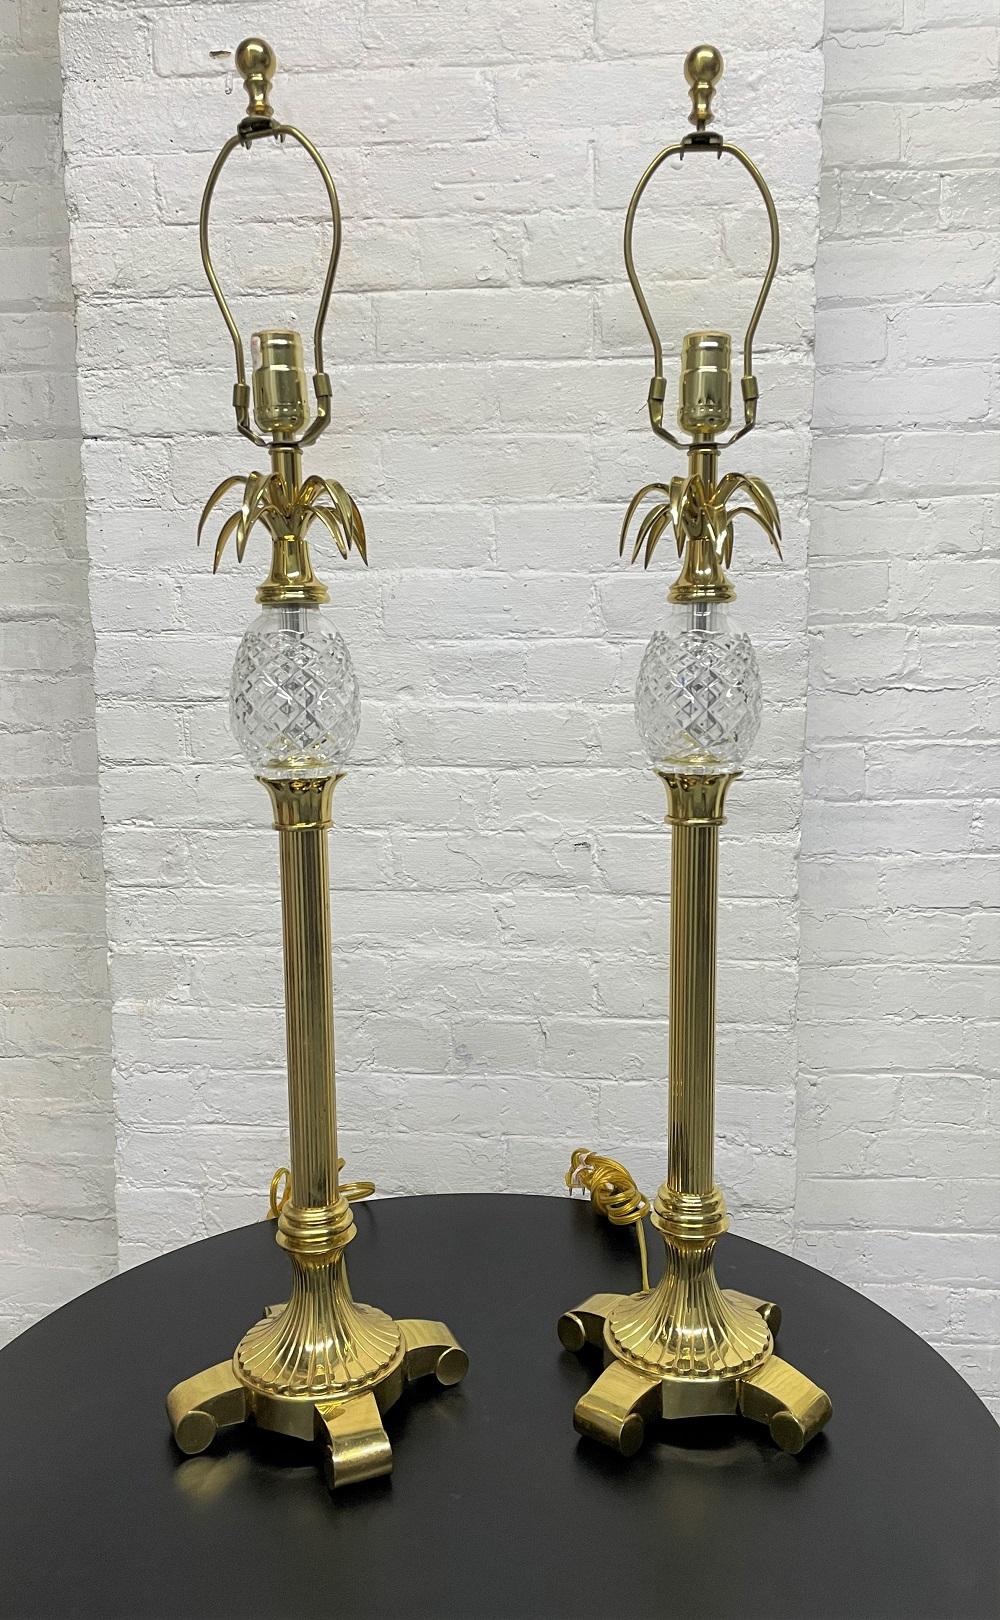 Pair of Brass and Crystal Pineapple Lamps.
Measures: 35H. Base: 8x8.